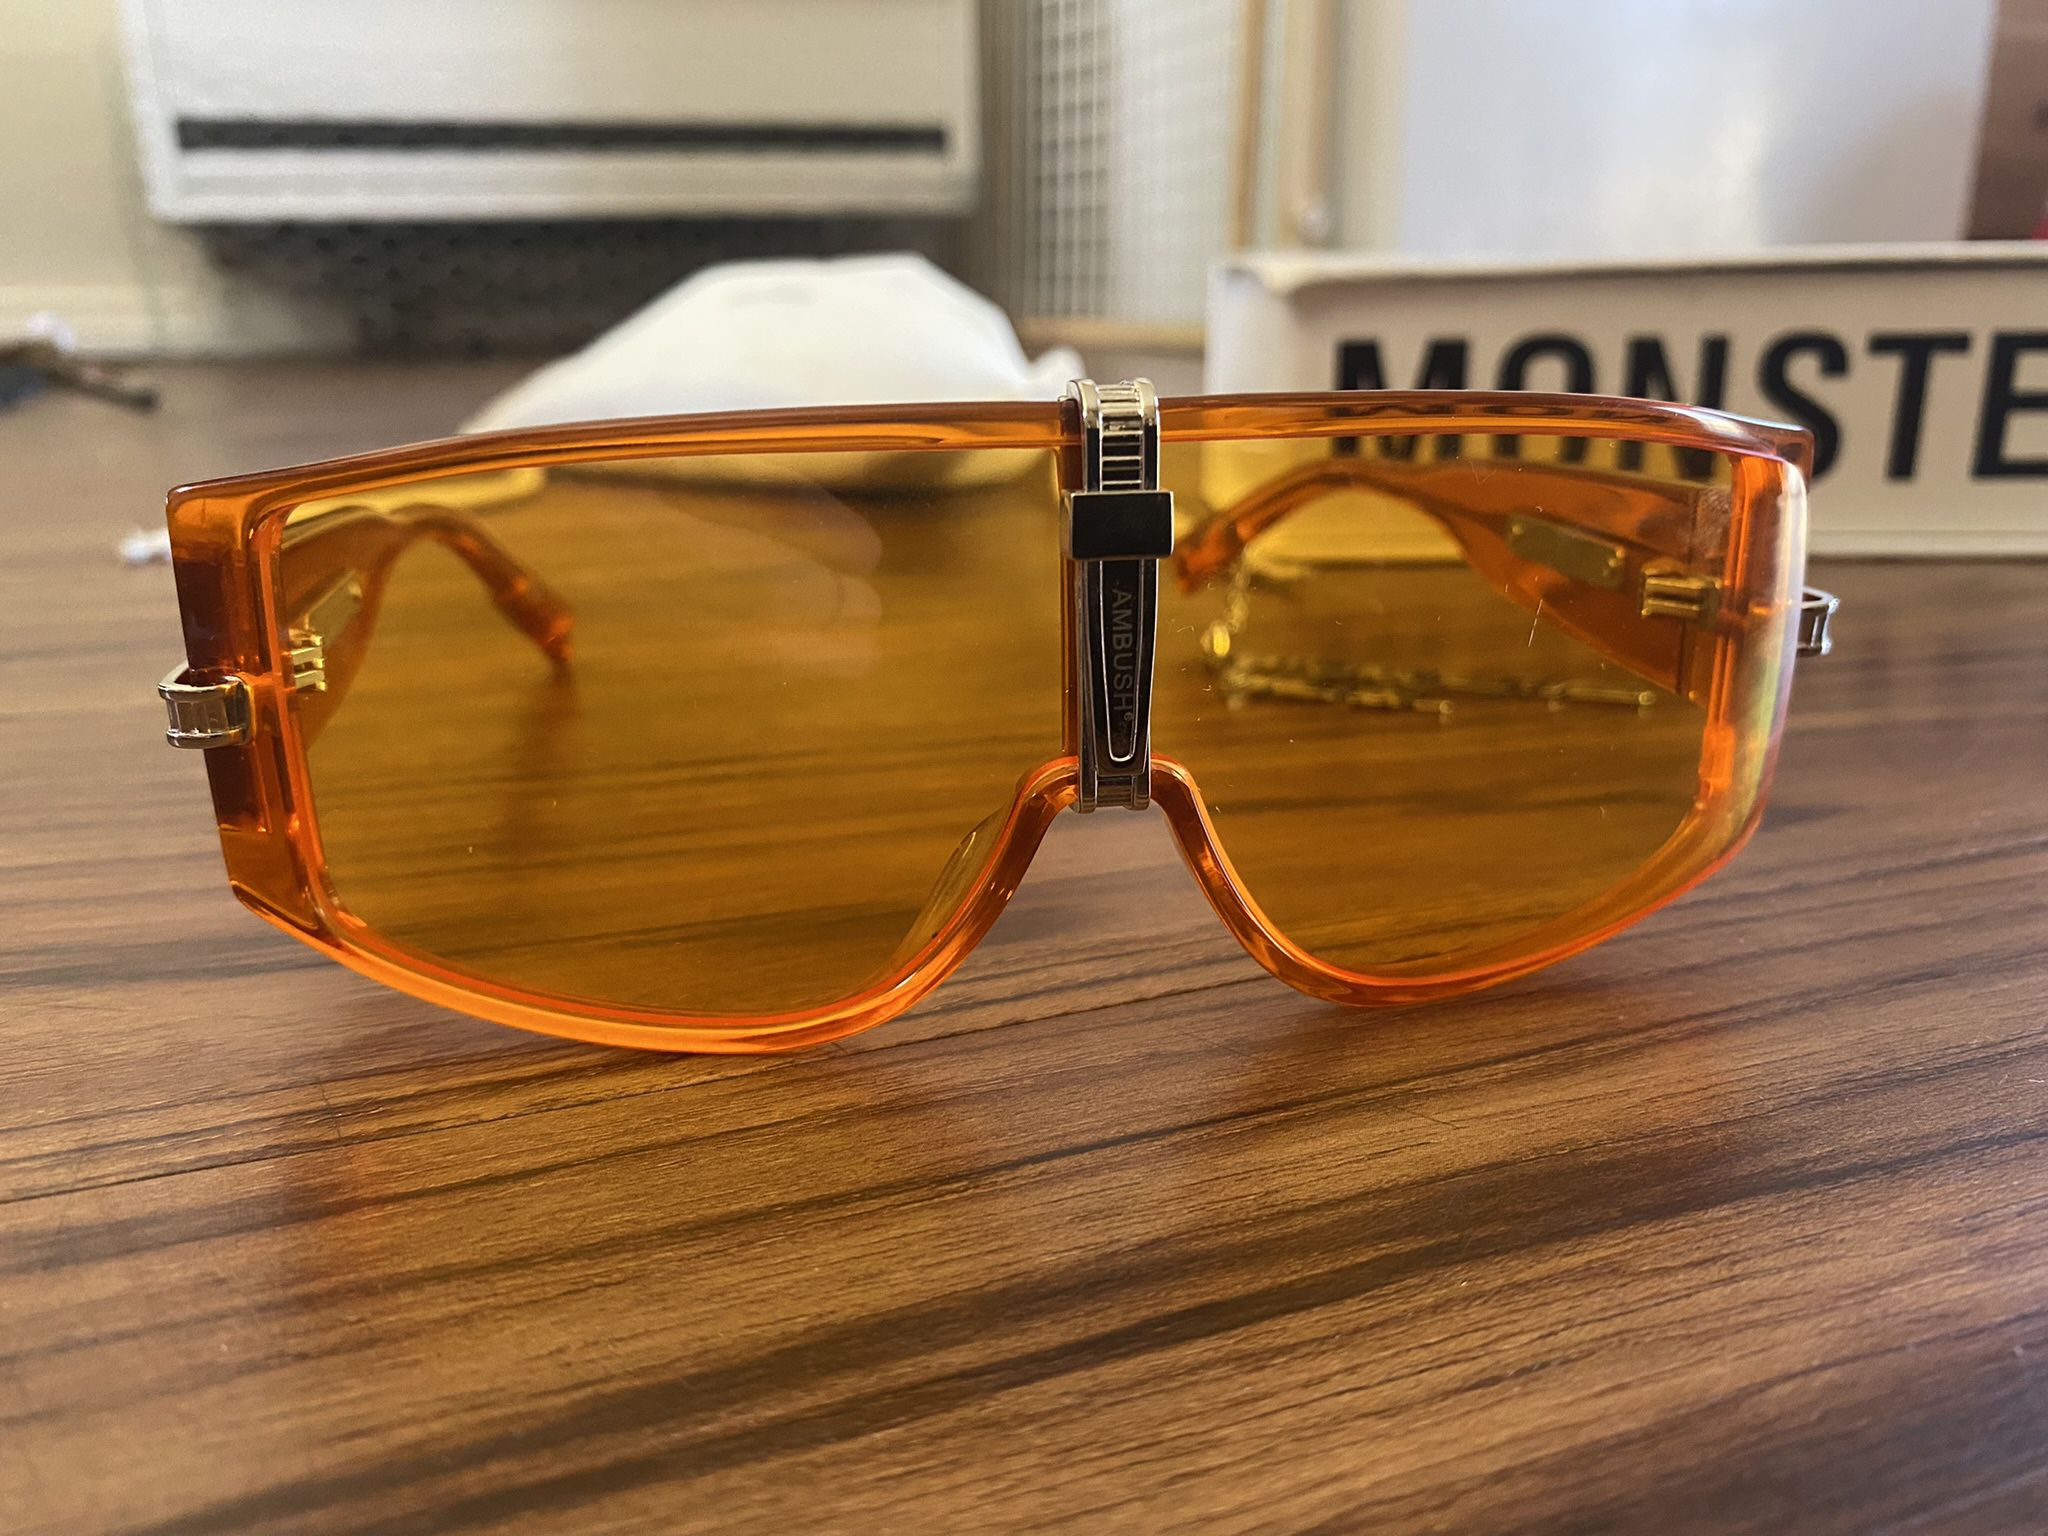 Gentle Monster Bling Sunglasses for Sale in Kent, WA - OfferUp